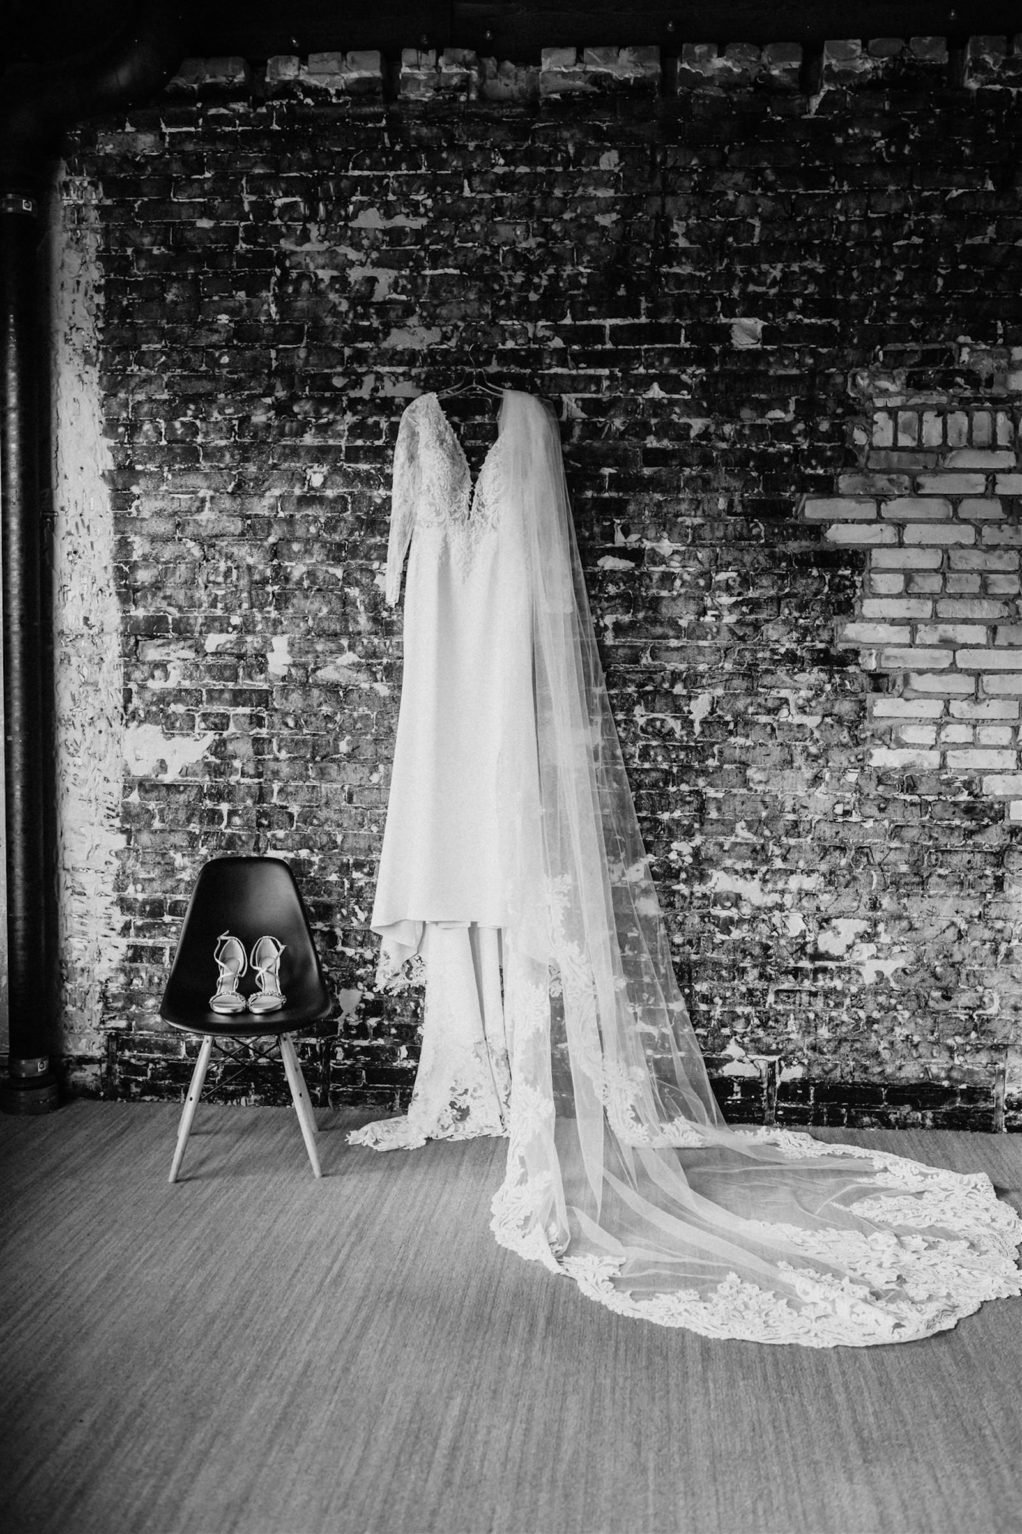 Black and White Photography Wedding Dress Hanger Shot on Brick Wall | V Neck Long Sleeve Lace Sheath Bridal Gown with Lace Trim Edge Cathedral Length Long Veil